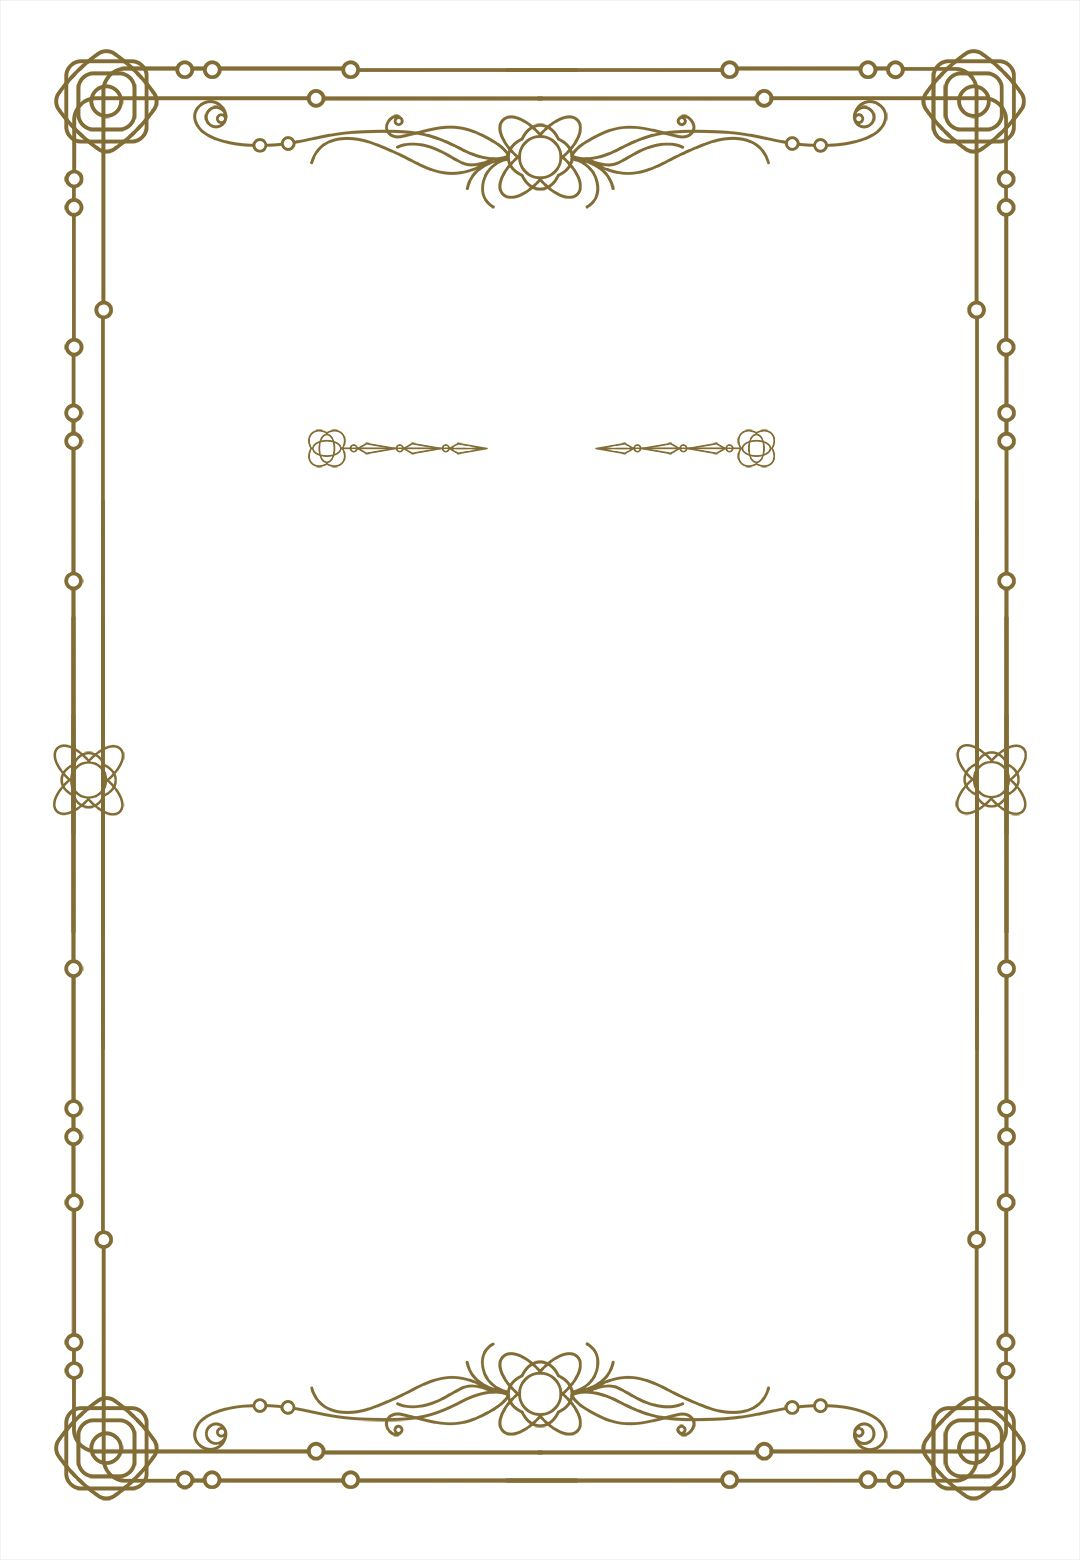 Classic Border Wedding Invitation Template Free In 2019 Heroes intended for proportions 1080 X 1560